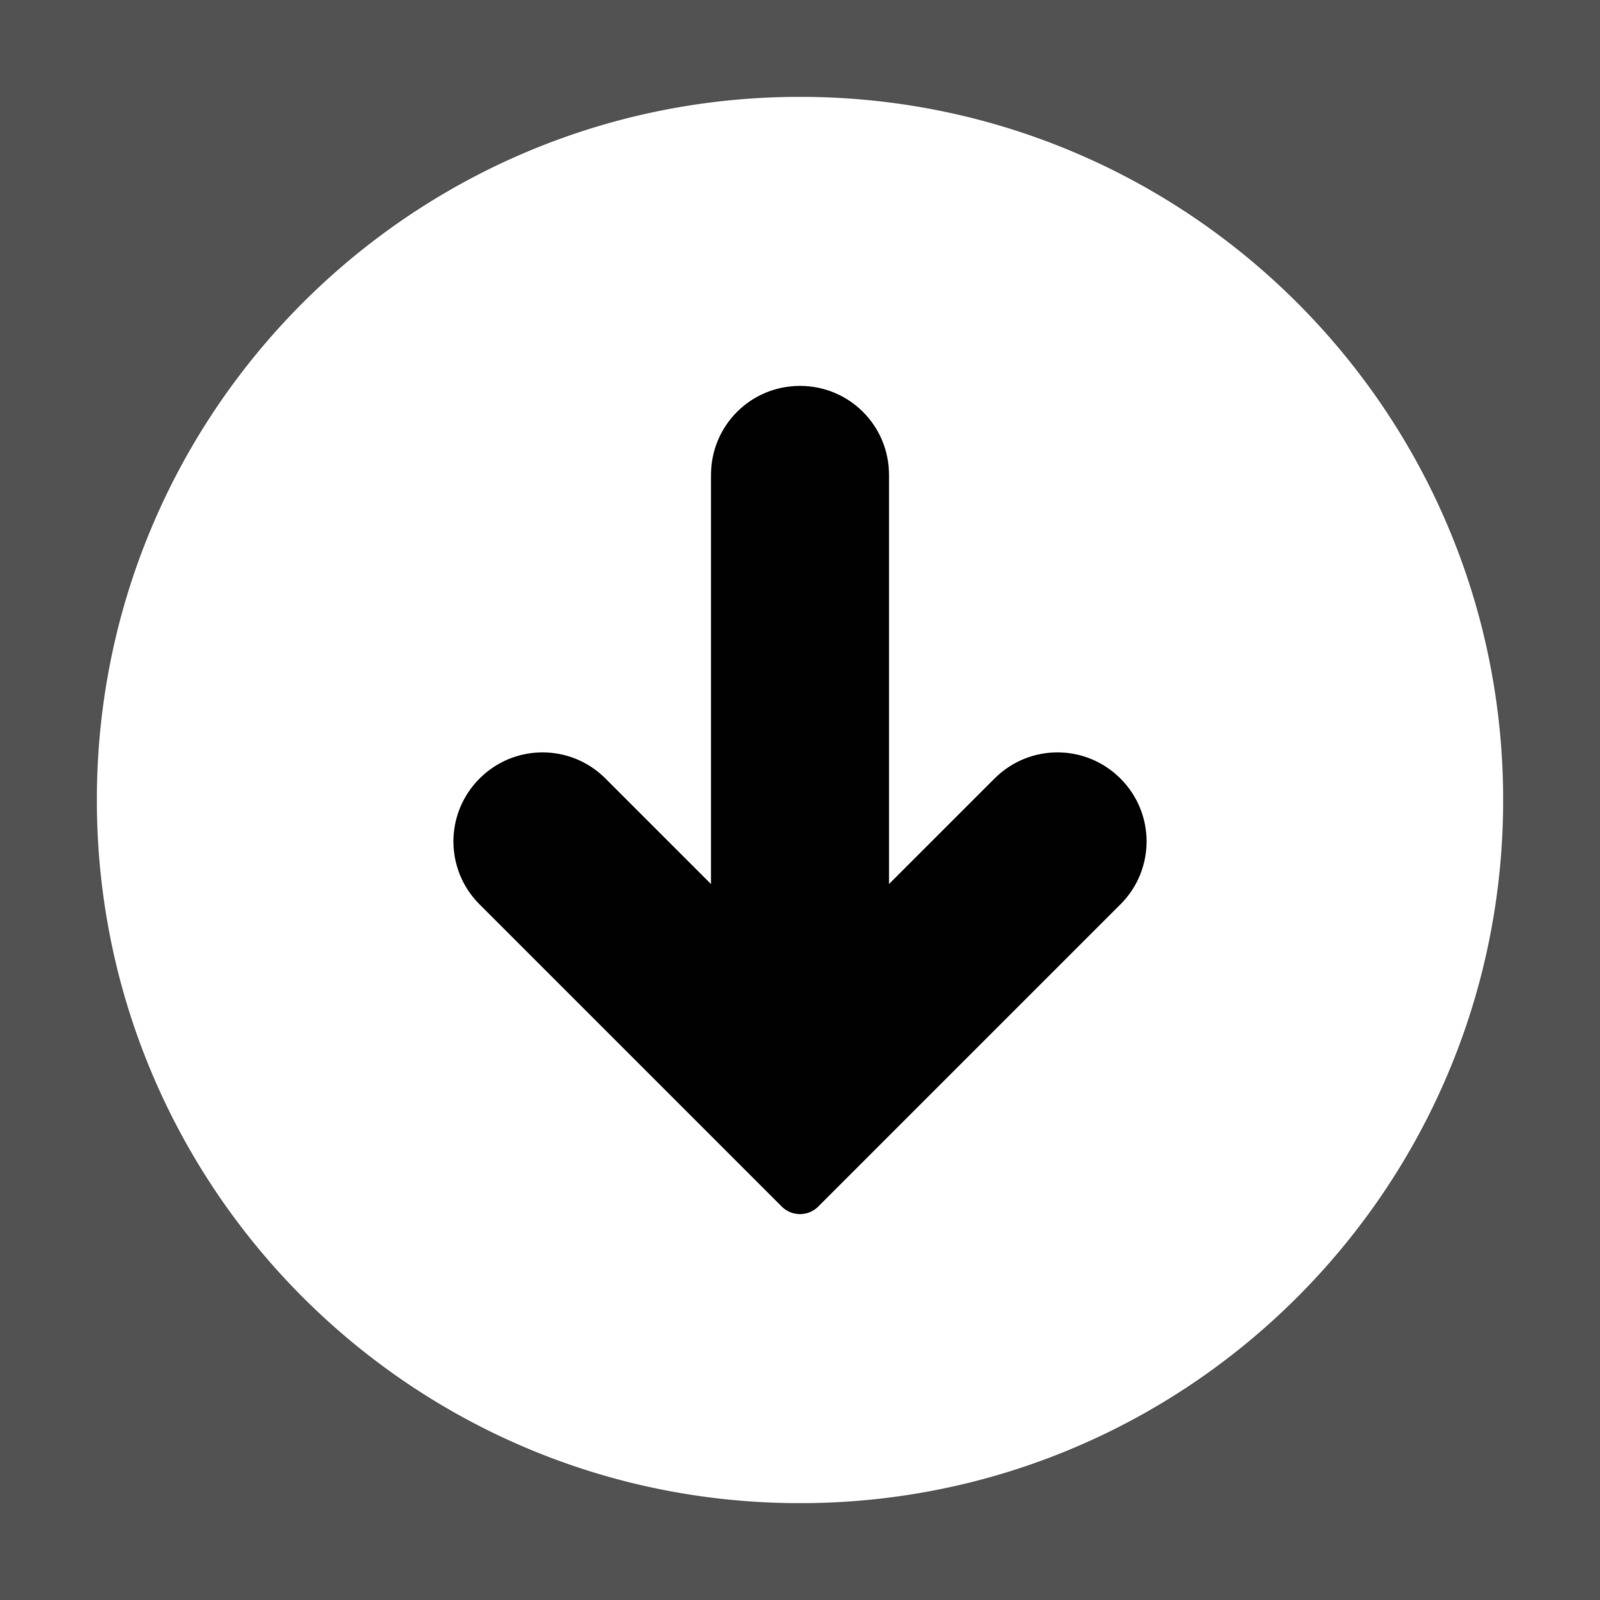 Arrow Down icon. This round flat button is drawn with black and white colors on a gray background.